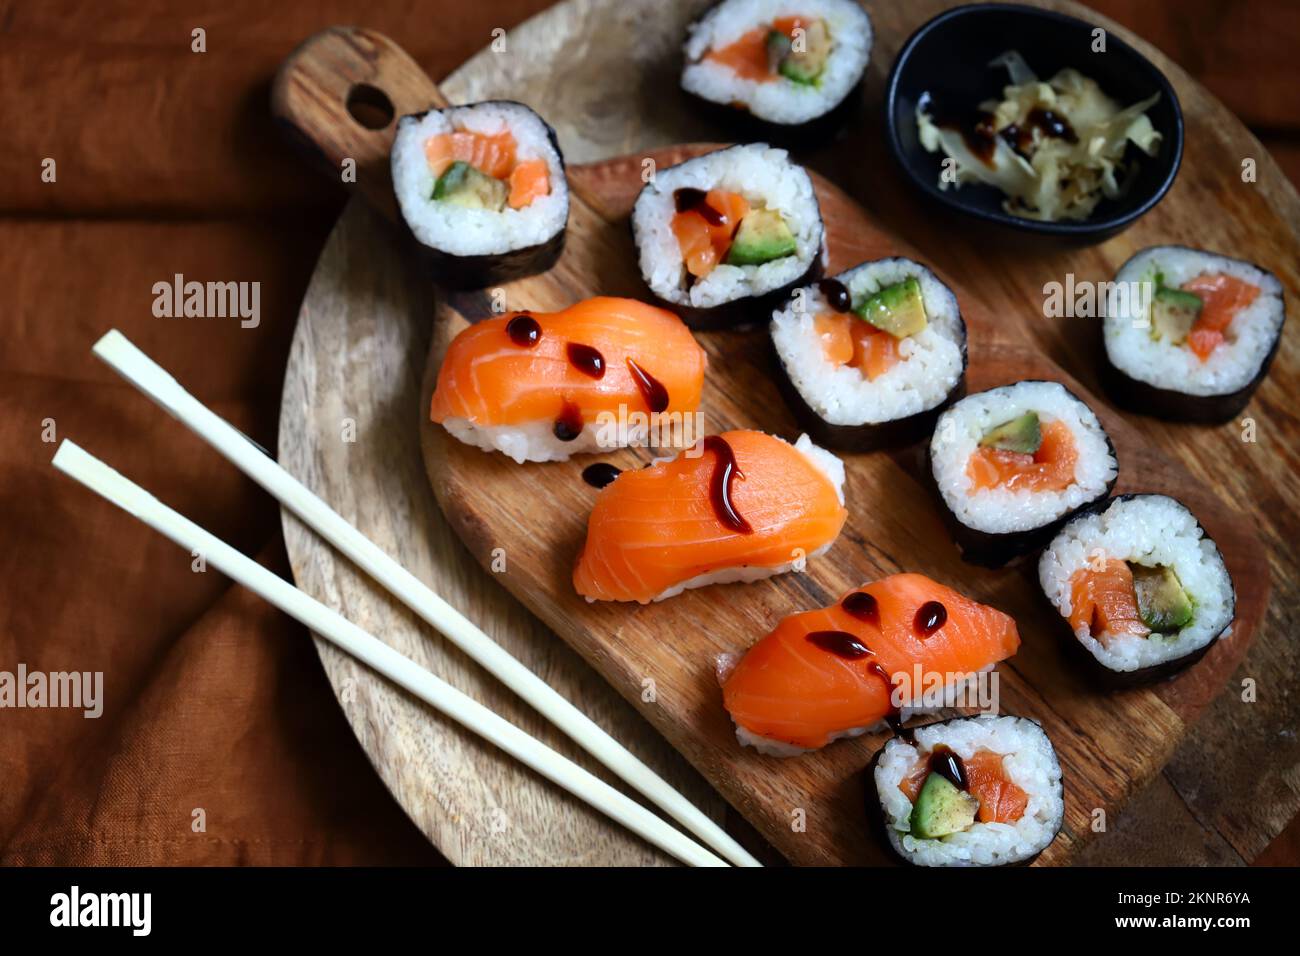 Sushi and rolls with avocado and salmon on a wooden board. Stock Photo